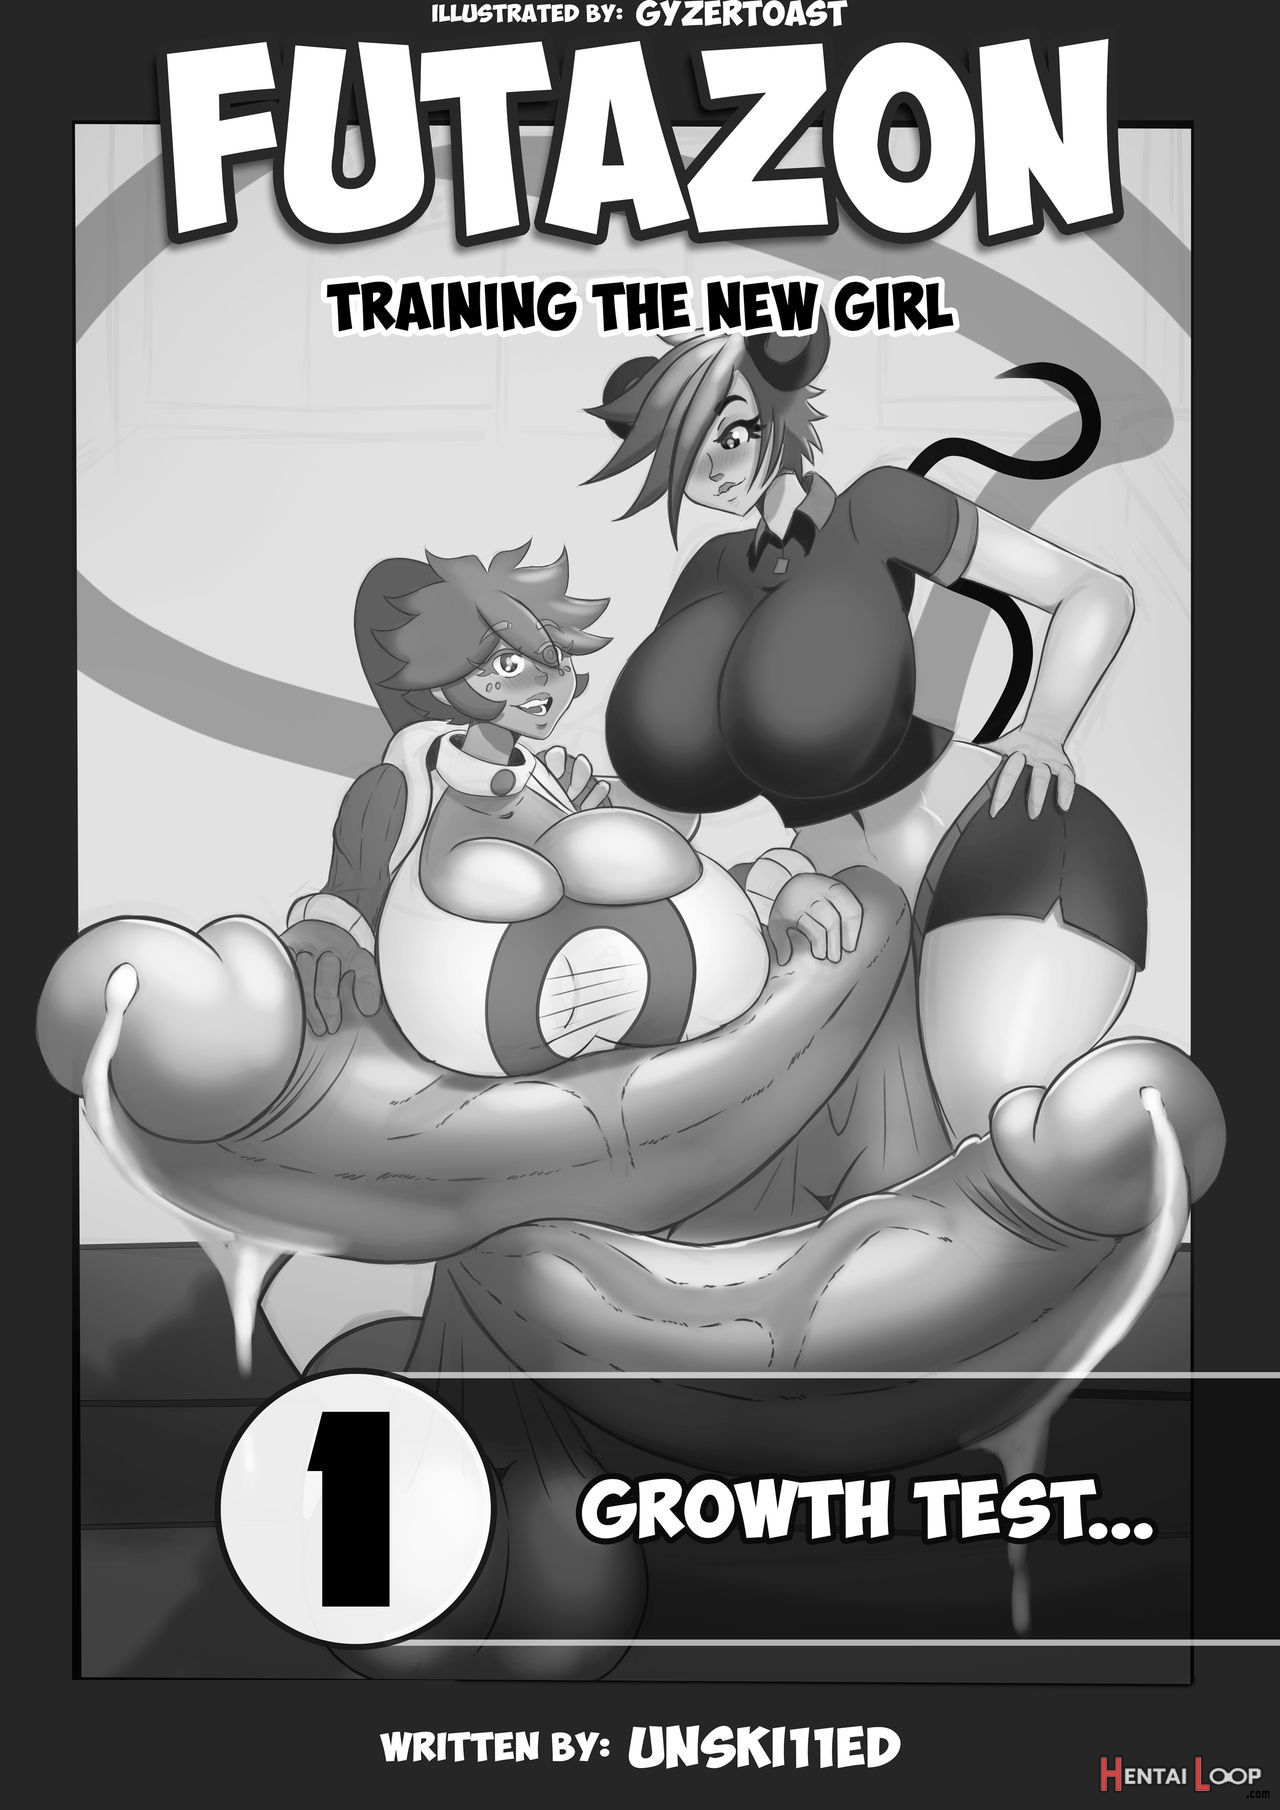 Futazon: Training The New Girl | Ch.1 Growth Test| page 2